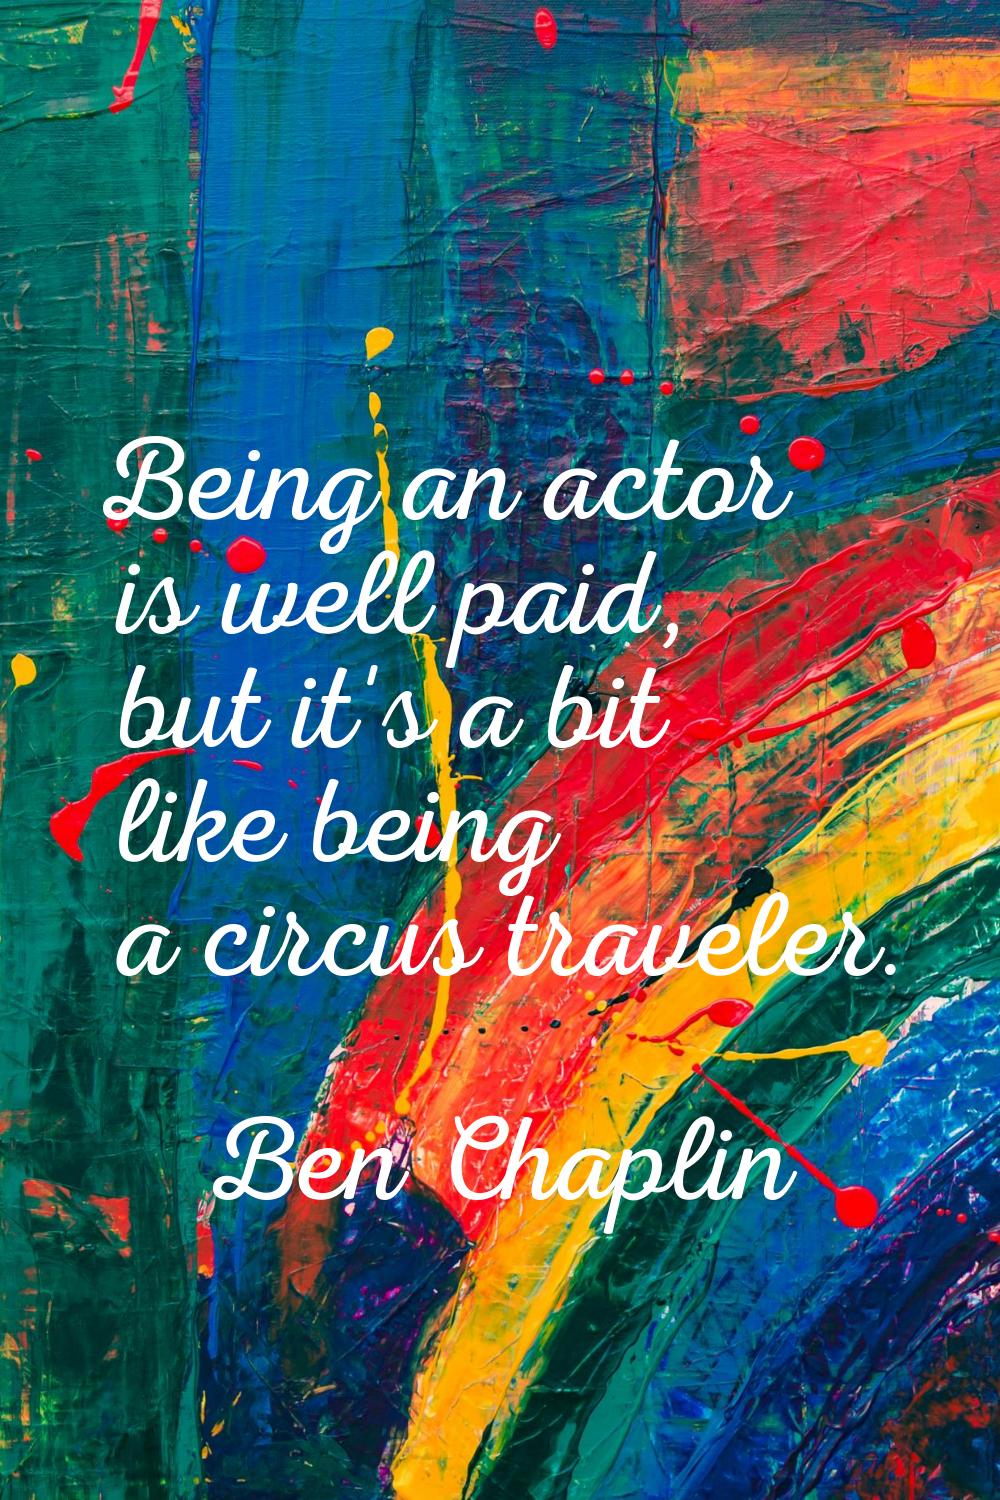 Being an actor is well paid, but it's a bit like being a circus traveler.